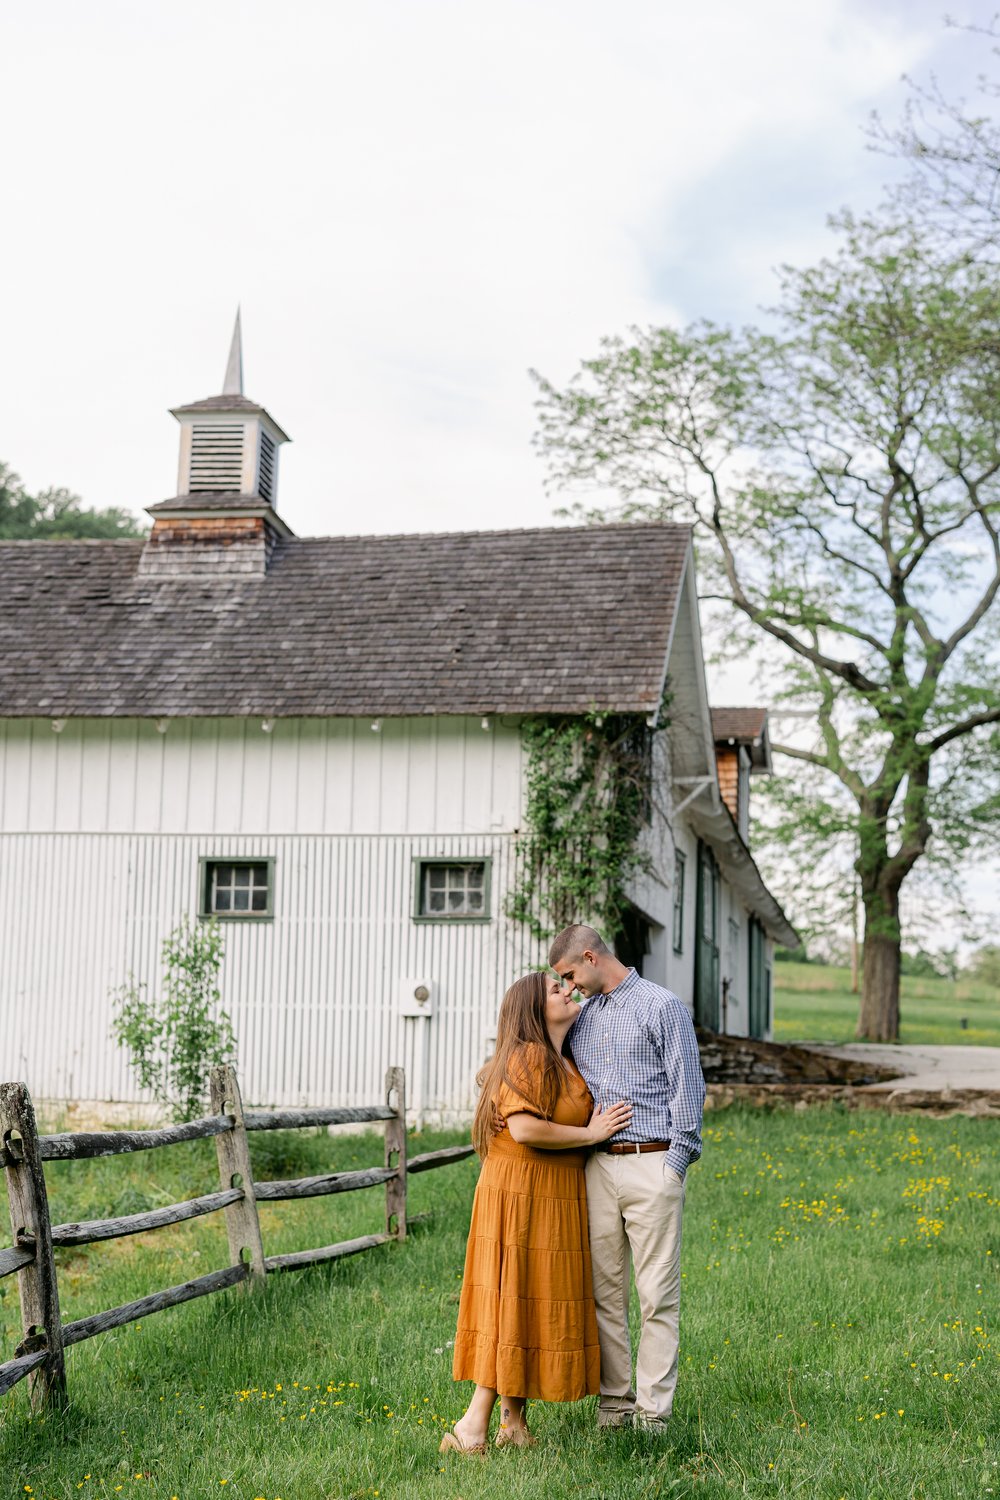 RBP-Ang-John-Engagement-Session-Teasers-Valley-Forge-PA-May-2022-16.jpg